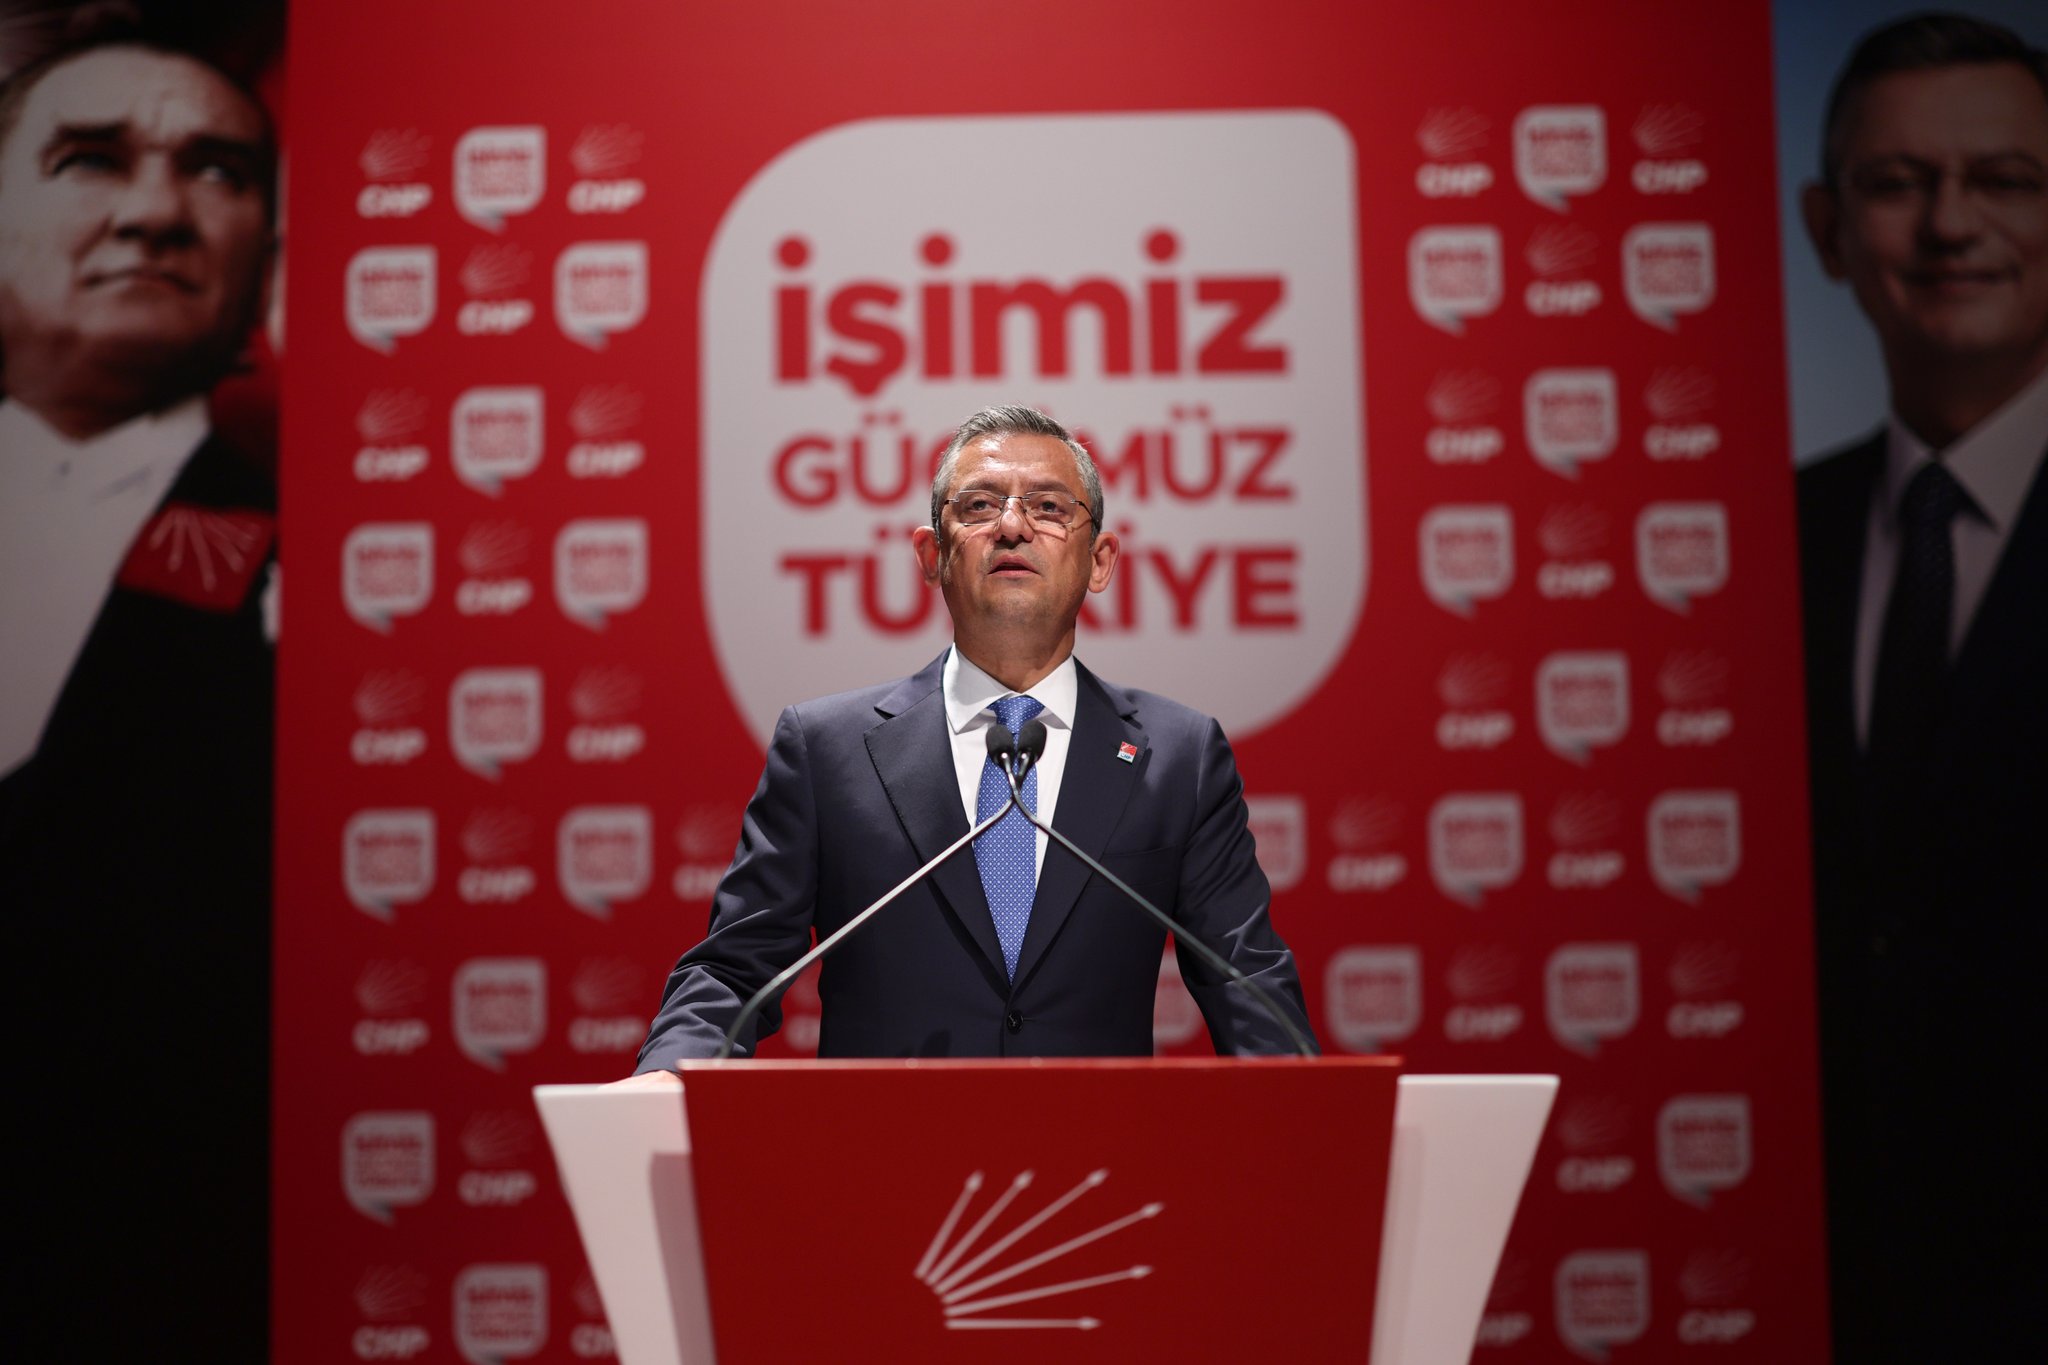 Turkey’s main opposition leader set for face-to-face meeting with Erdoğan